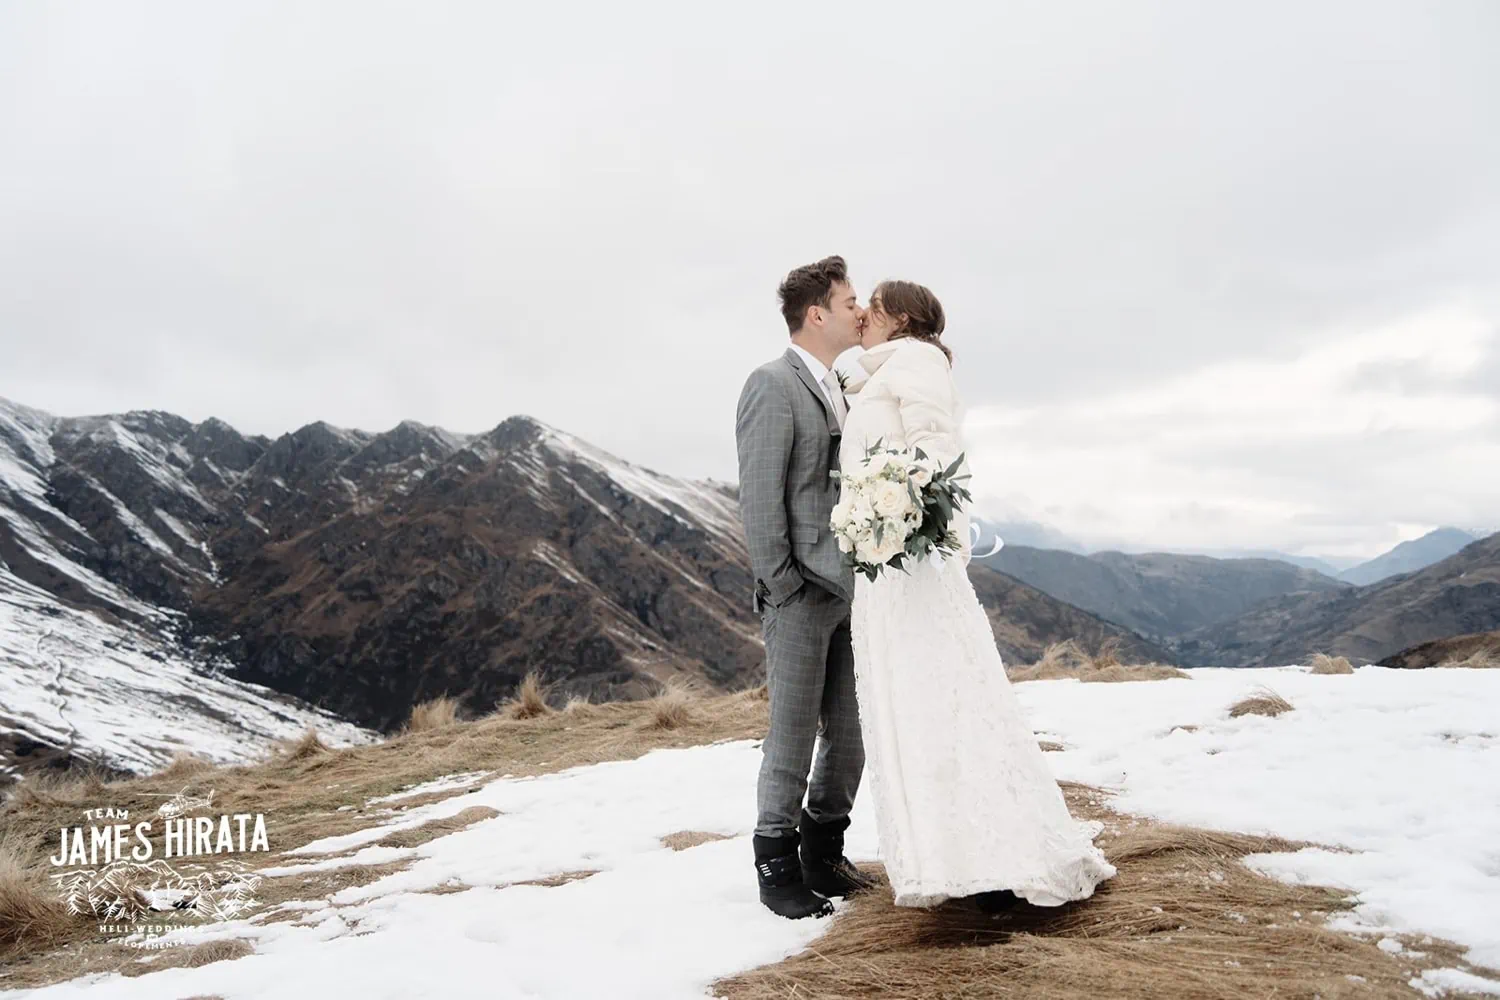 Regan & Jake sharing a passionate kiss during their Queenstown elopement on a snow covered mountain.